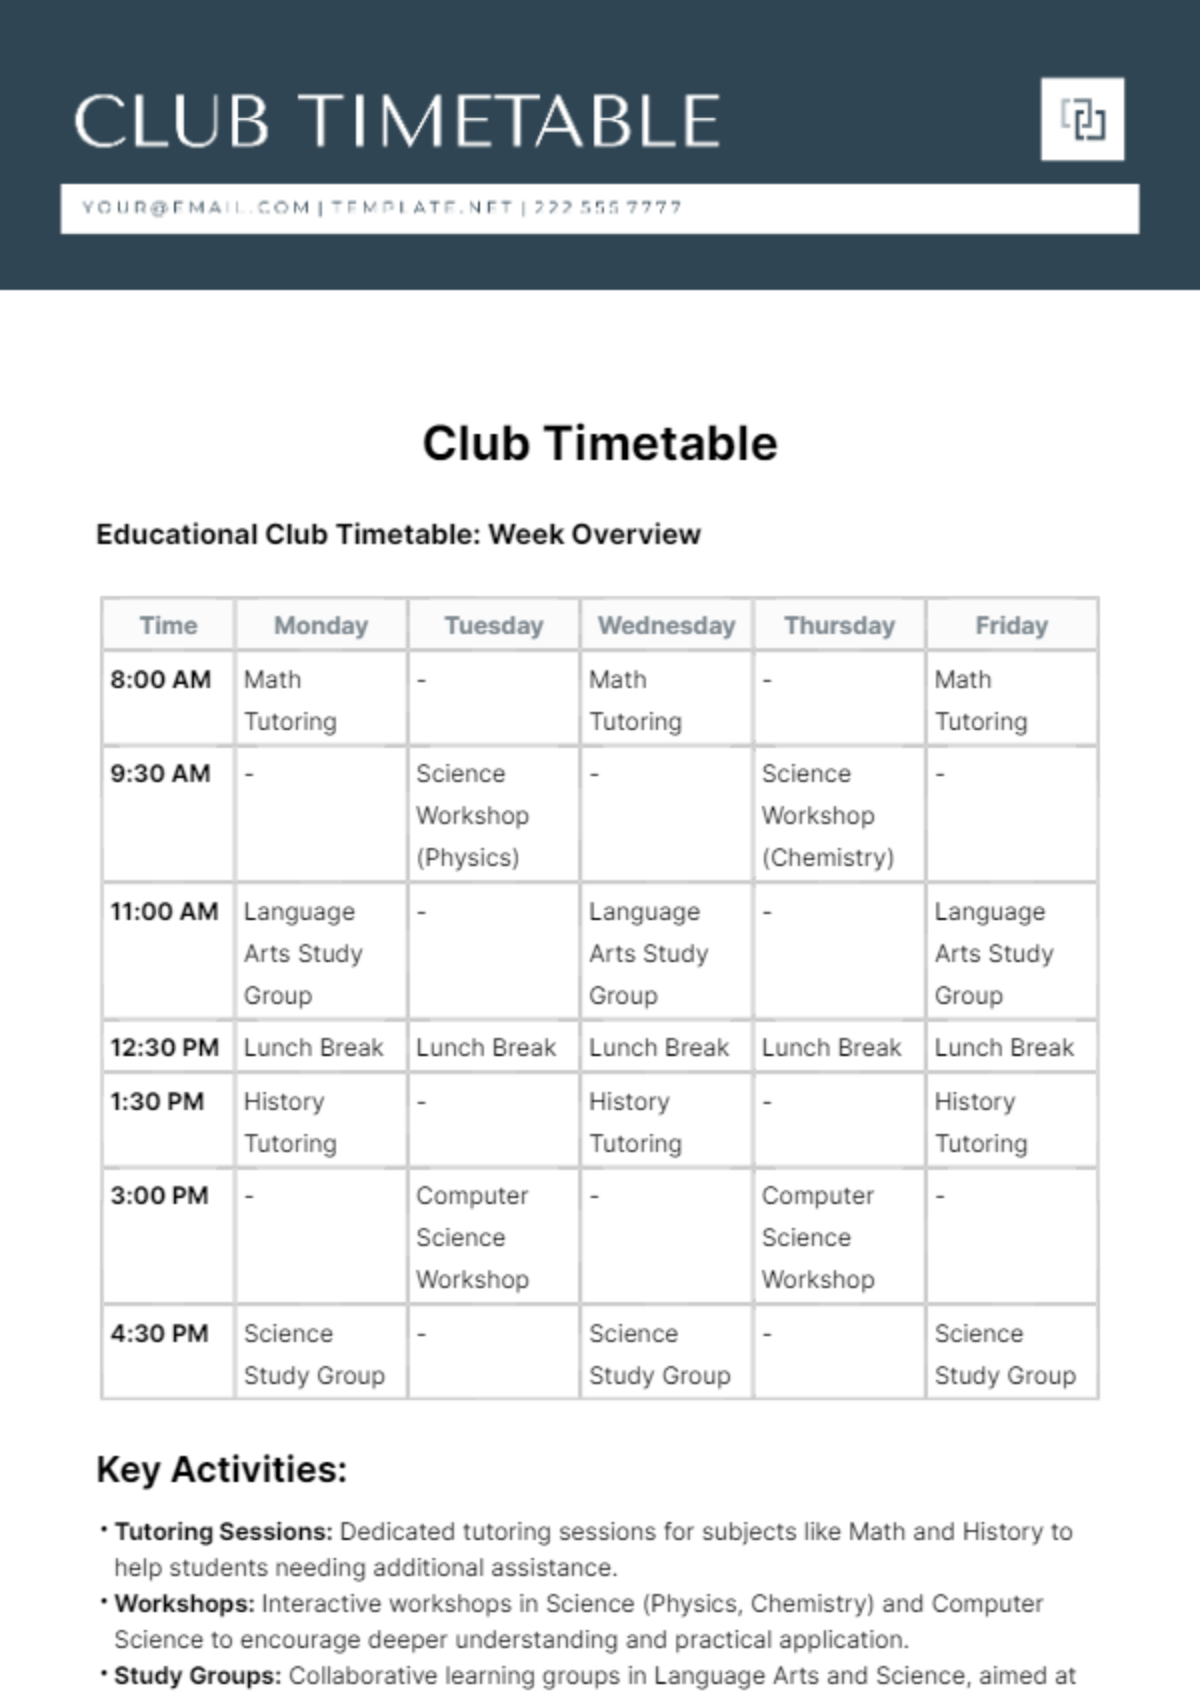 Club Timetable Template